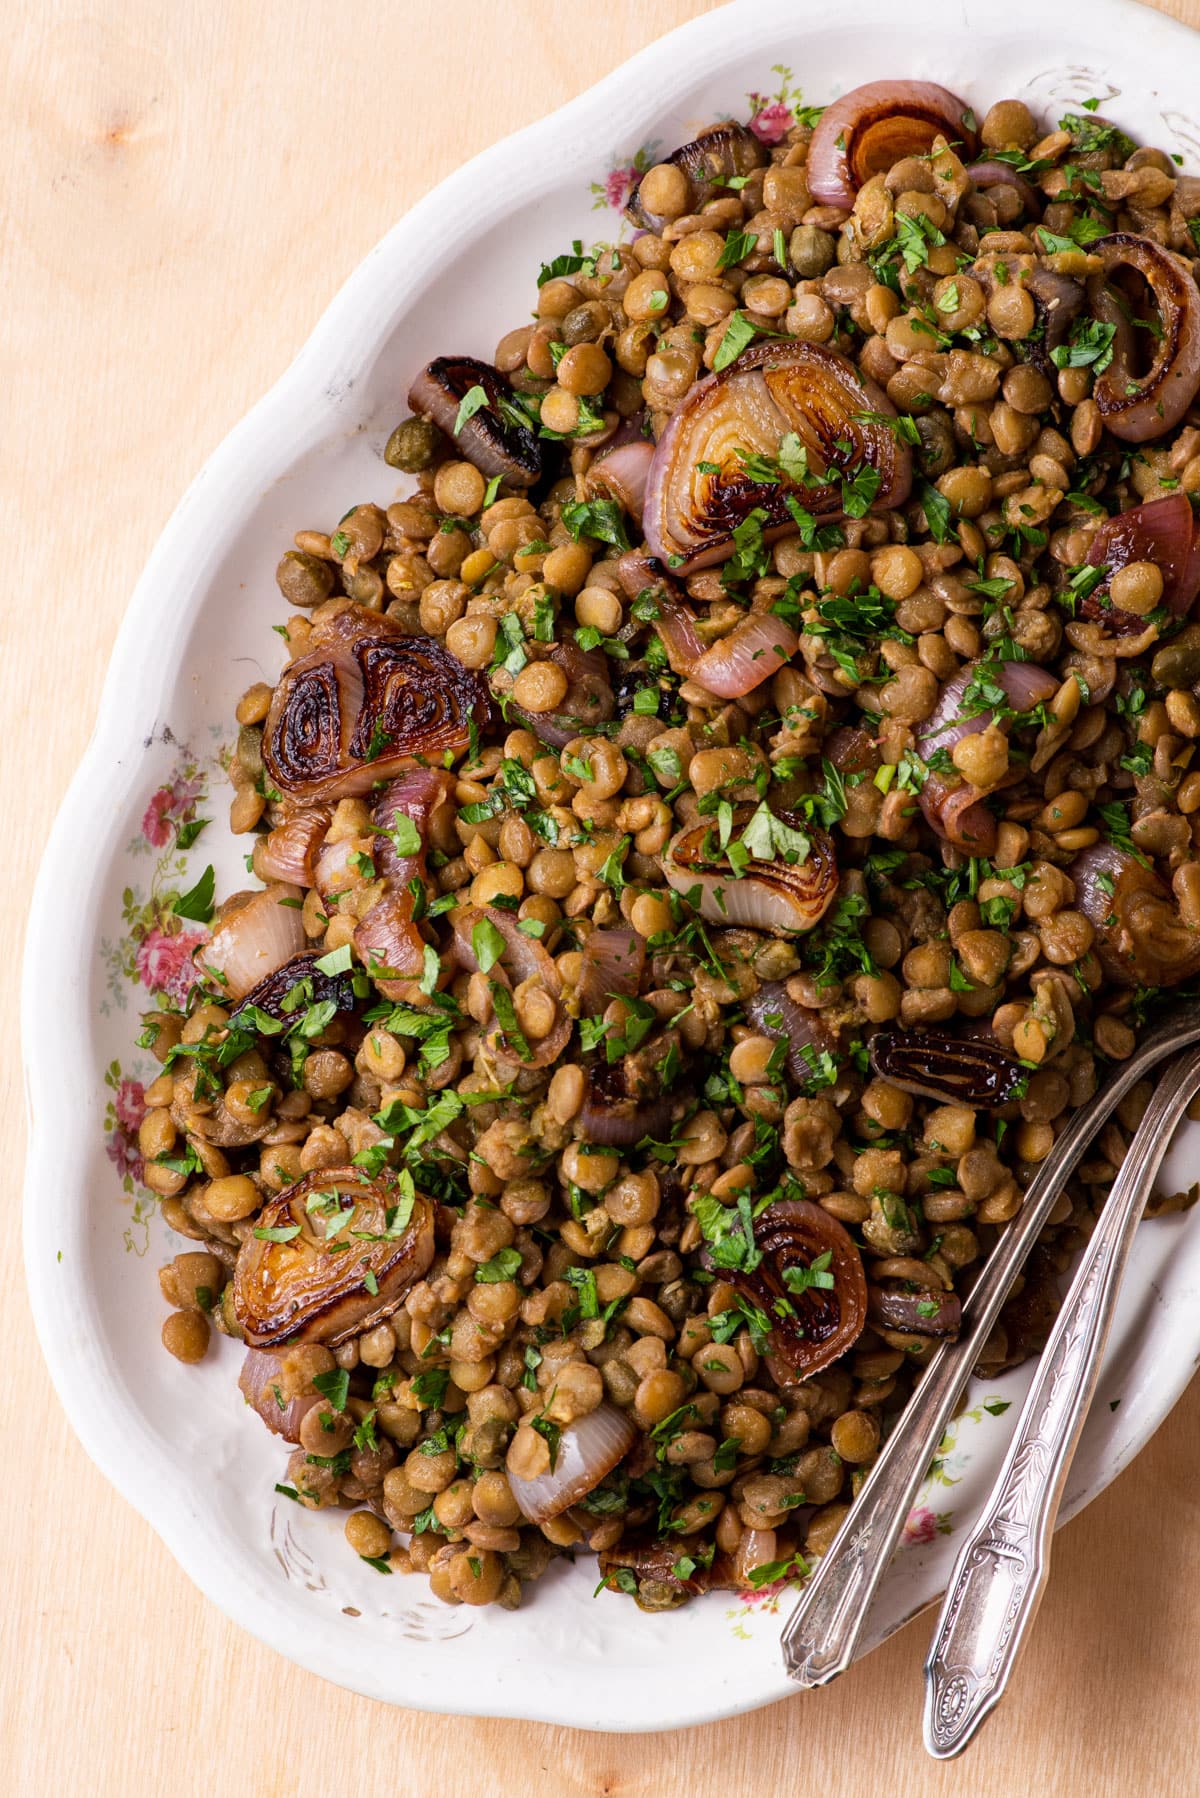 Vegan lentil salad with shallots, capers, and parsley.